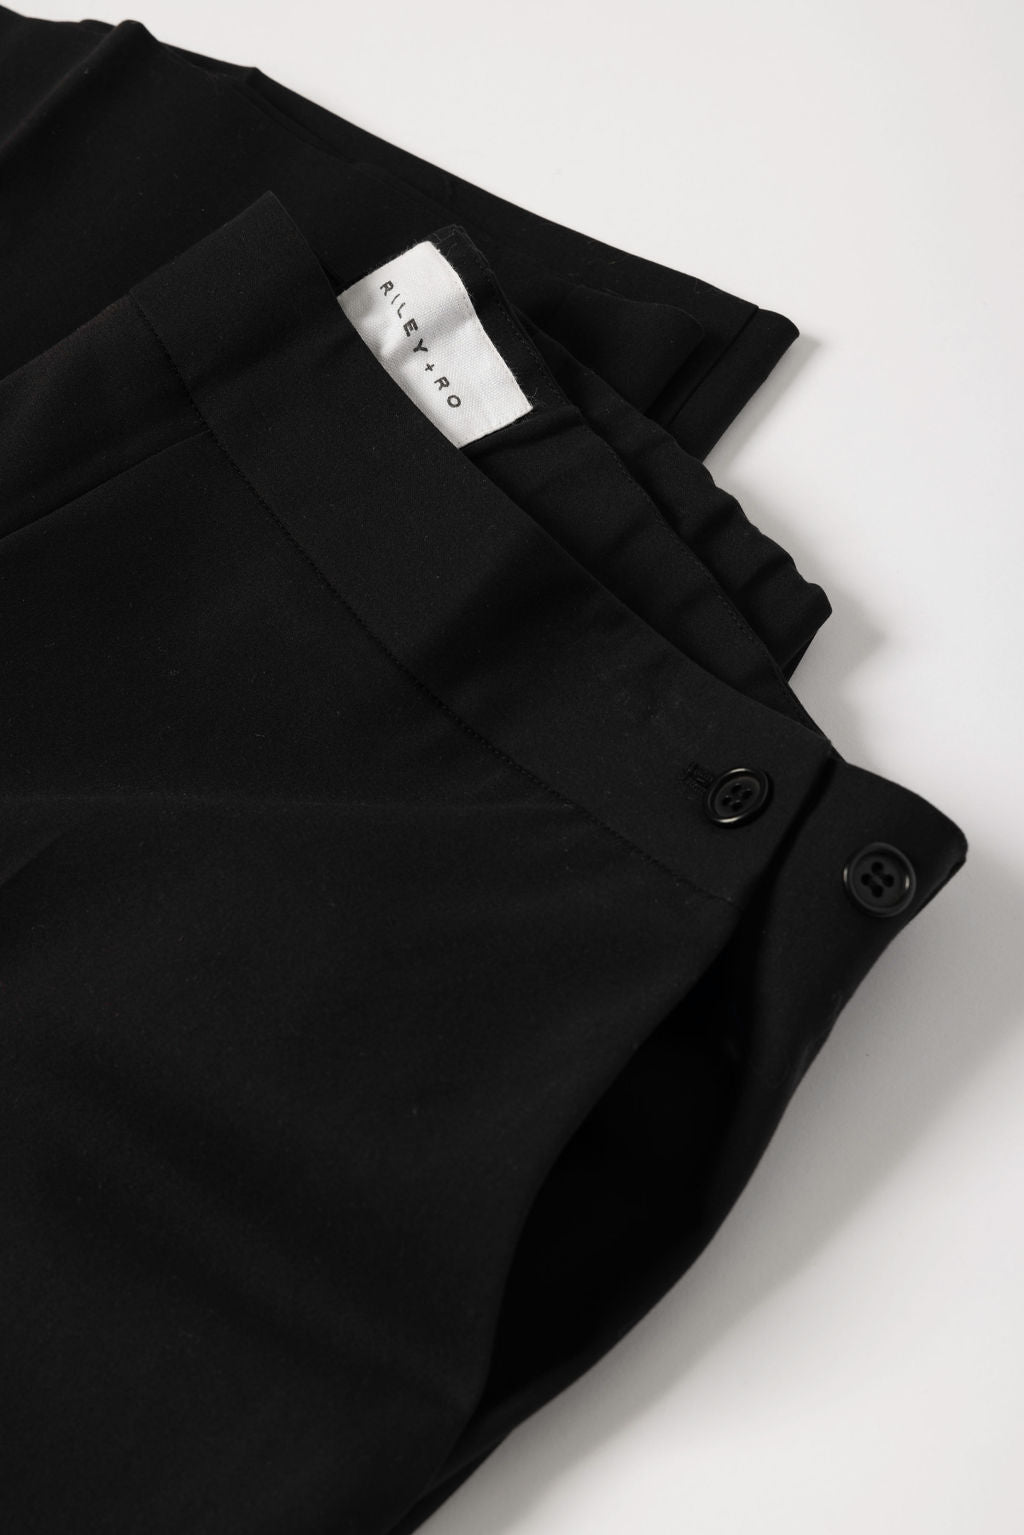 Minimalist Capsule Wardrobe High waisted, Wide Leg Trousers in Black Adjustable Waist Button Details